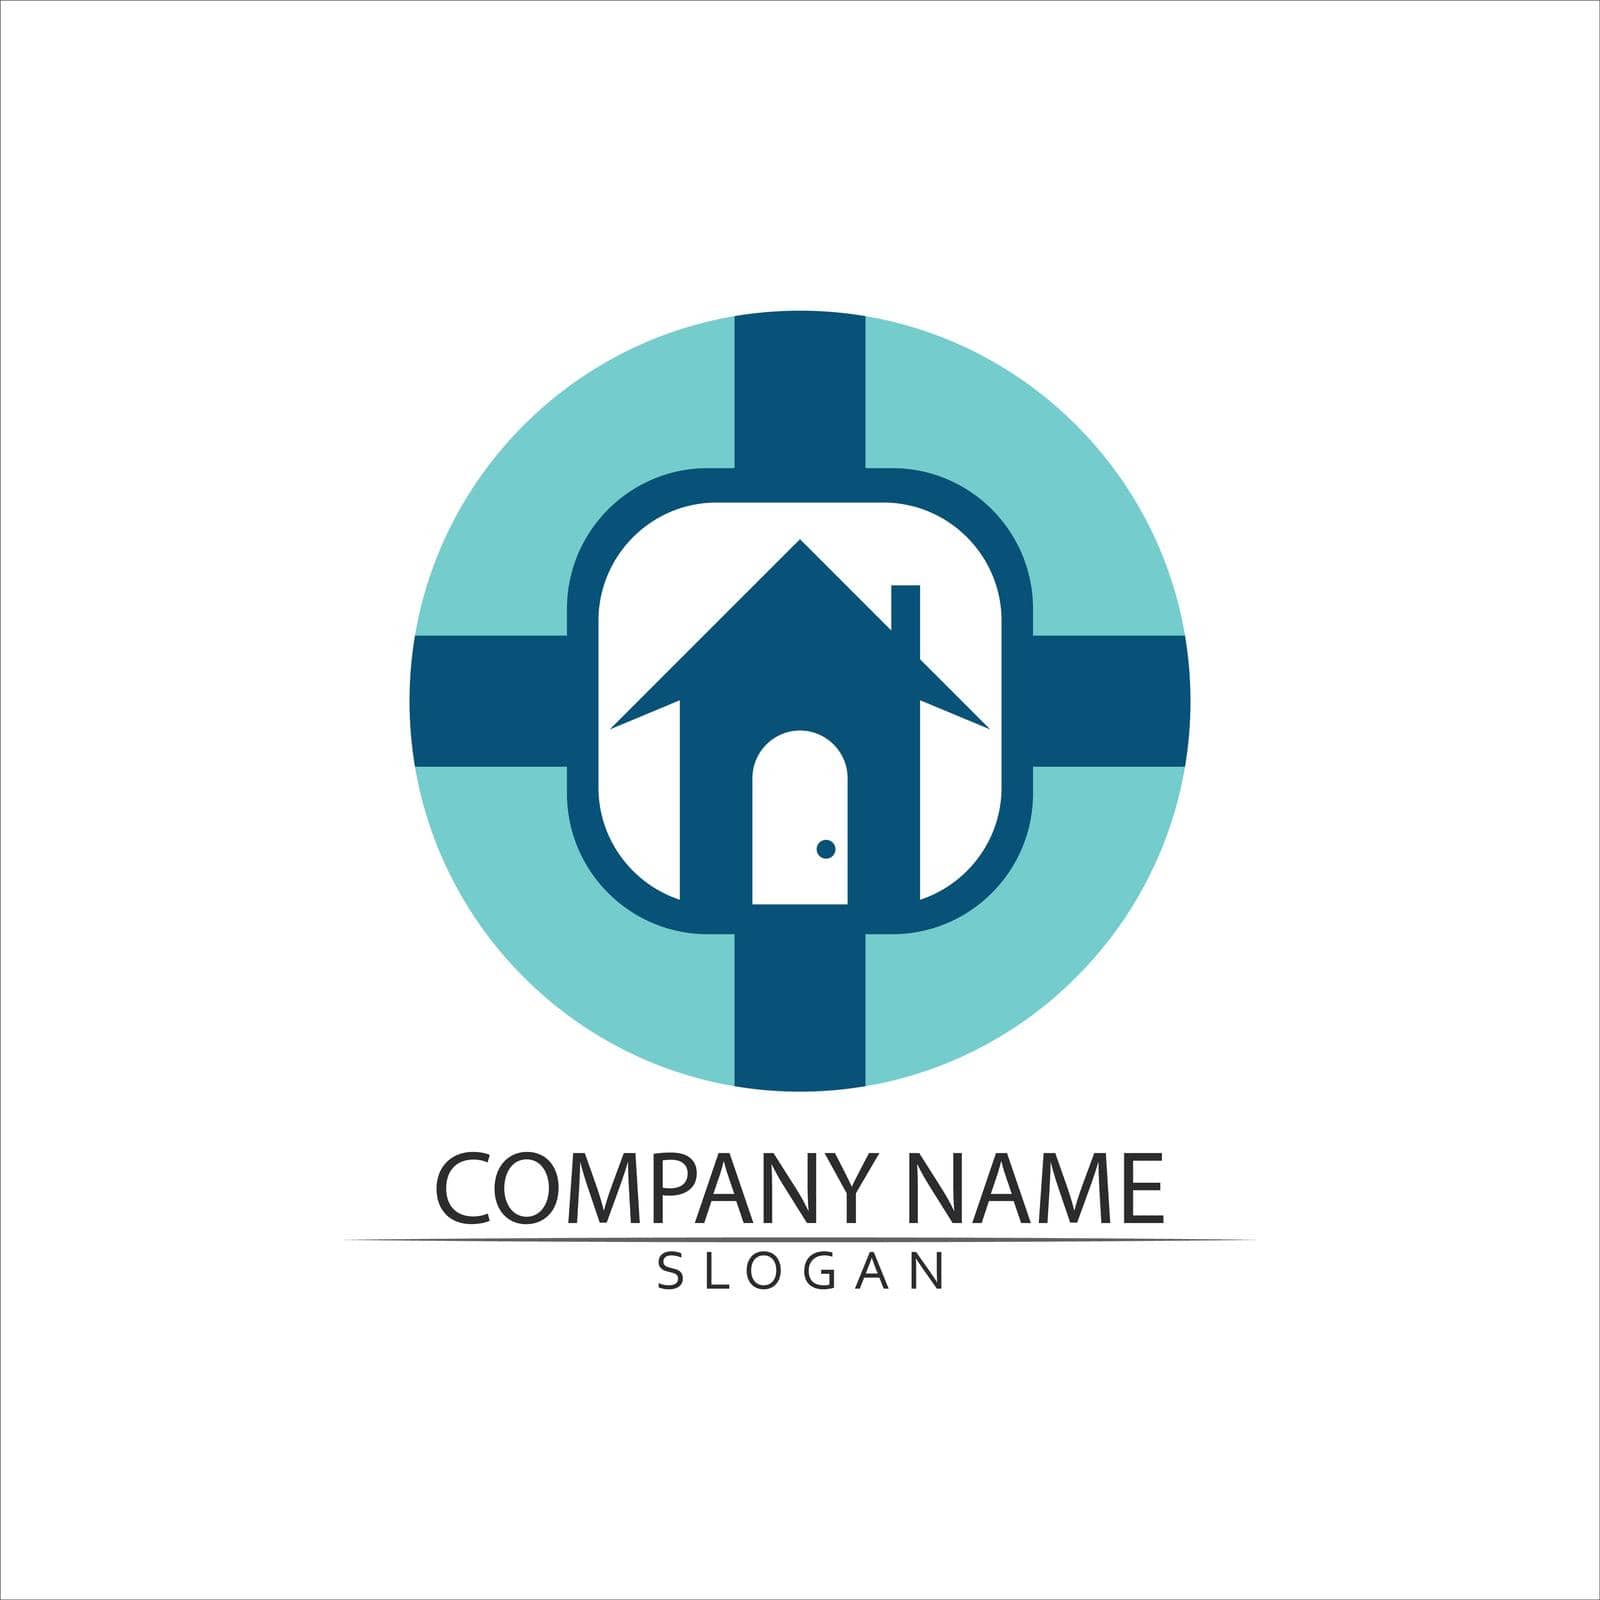 Real estate and home buildings logo icons template by Anggasaputro